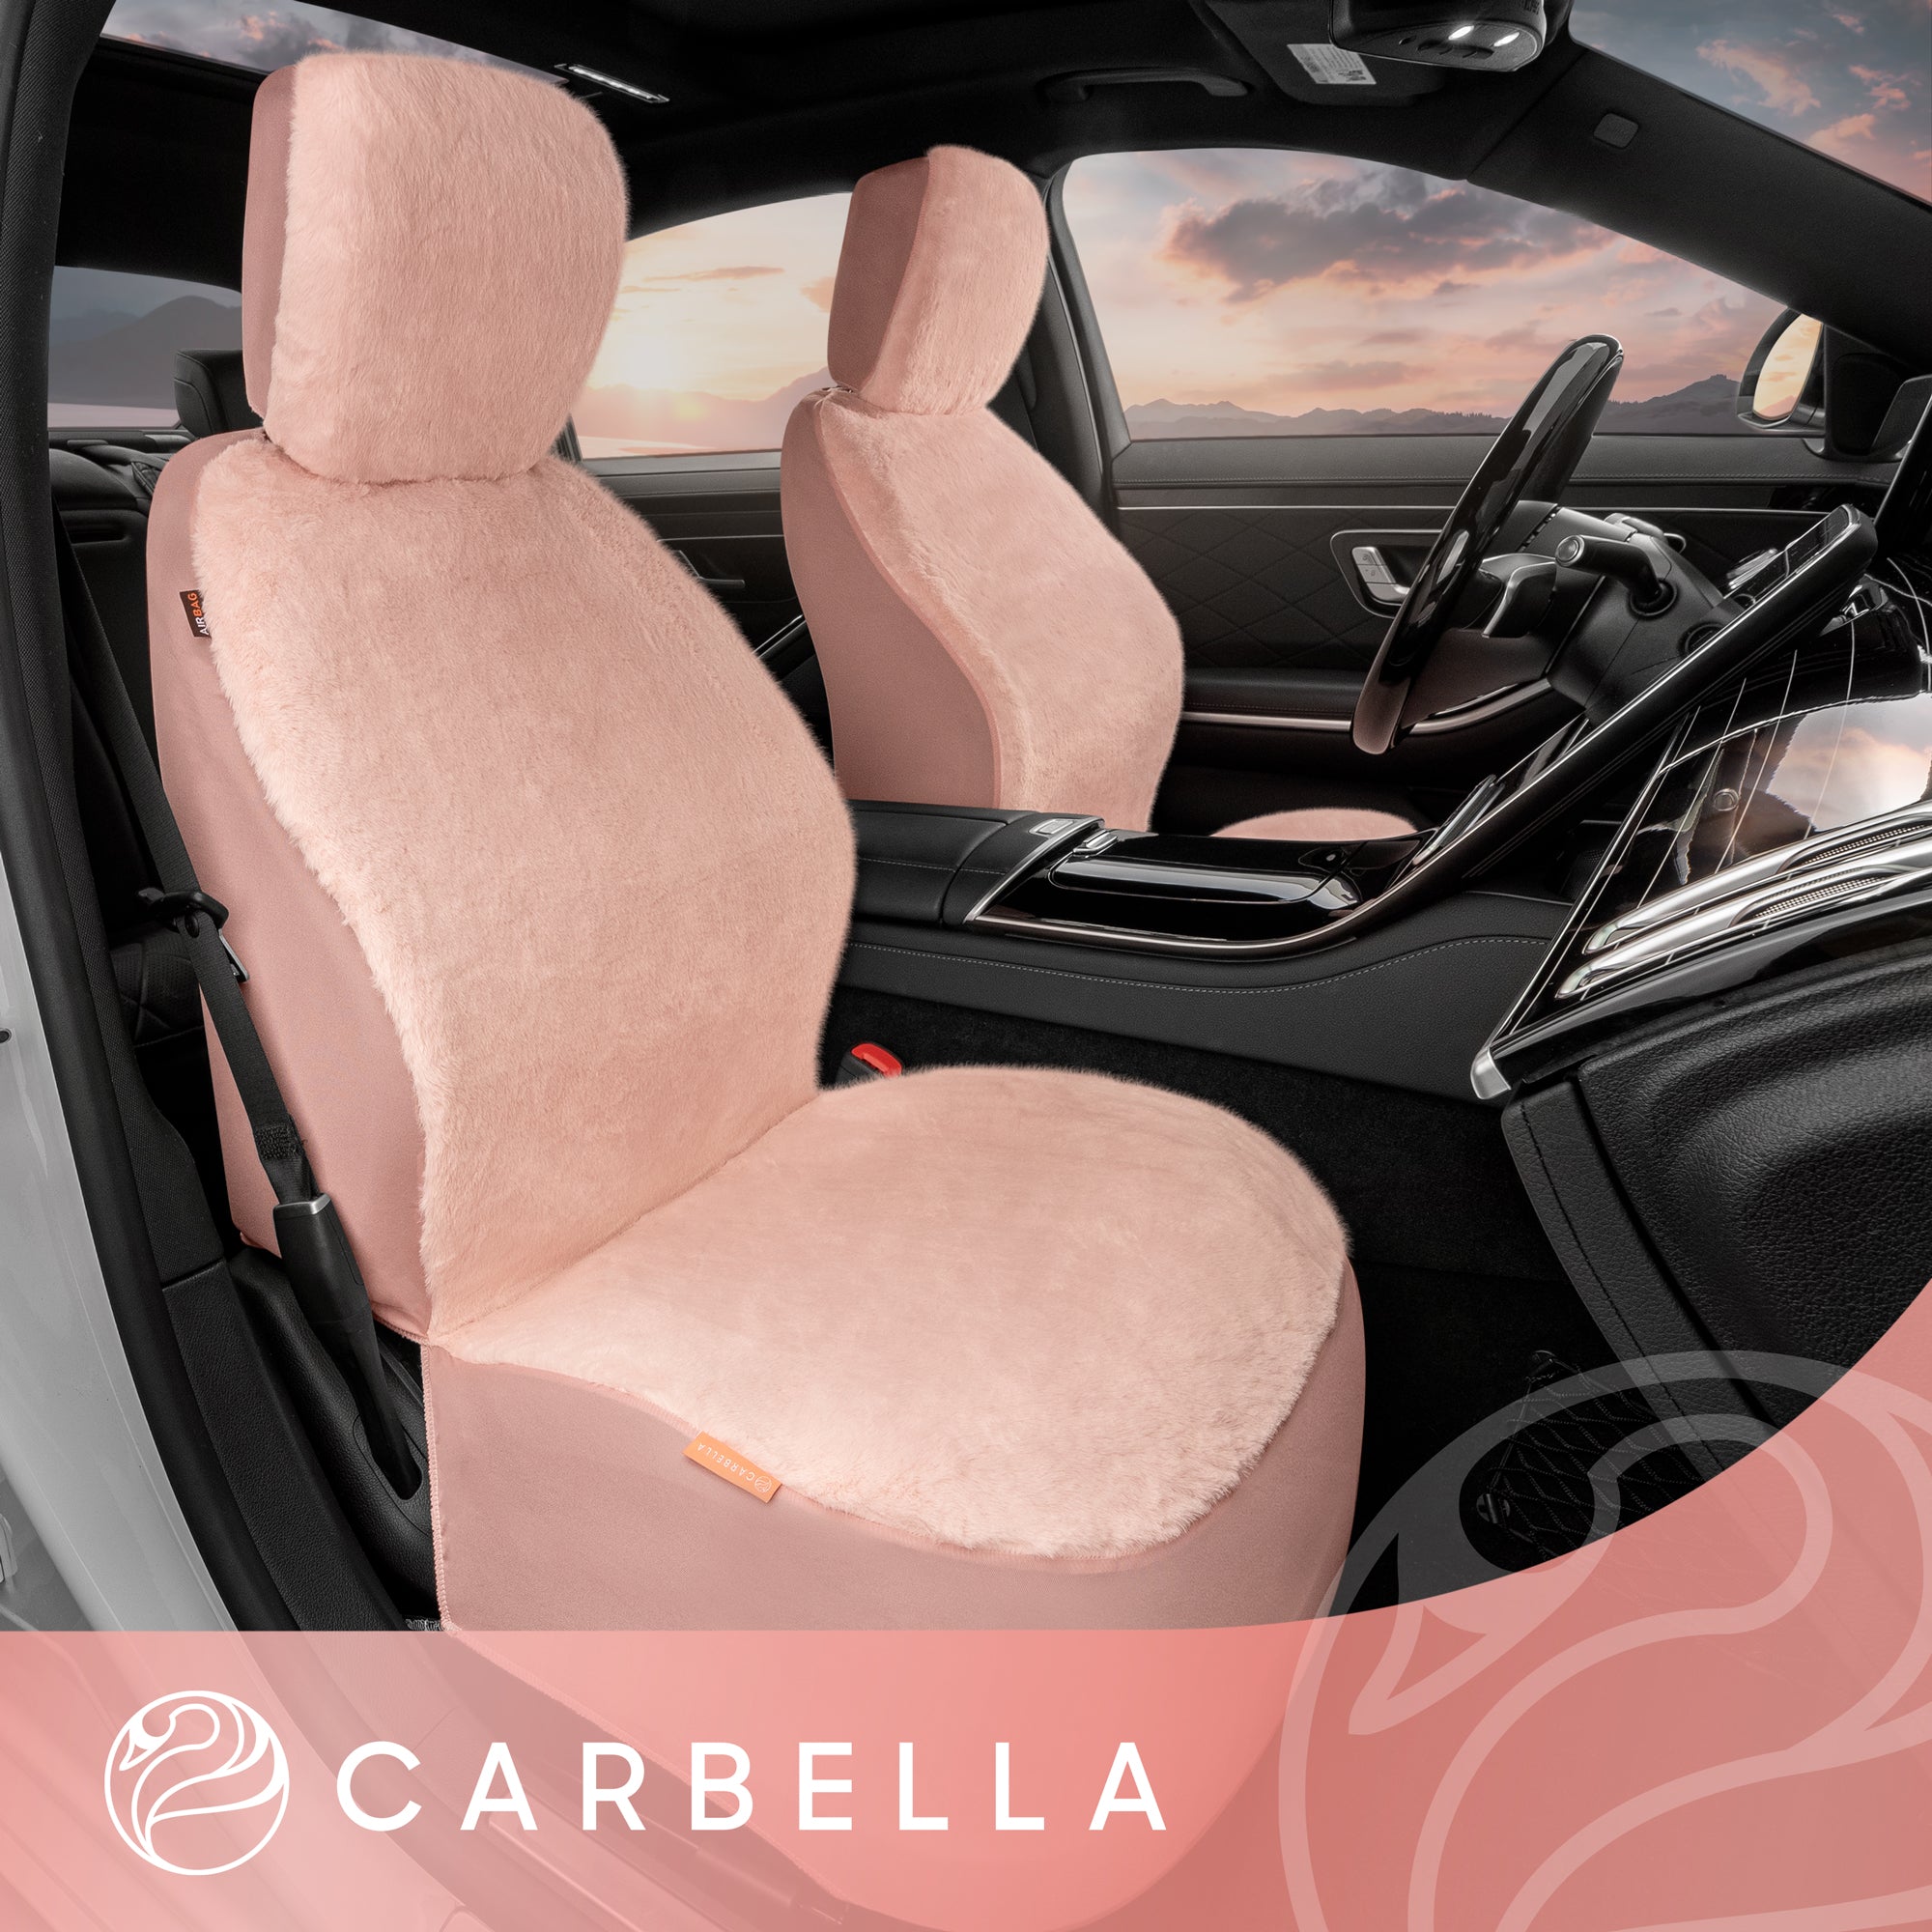 Carbella Sheepskin Car Seat Covers for Women, 2-Pack Faux Fur Car Seat Covers Front Seats Only, Cute Automotive Seat Covers For Cars for Women, Car Accessories for Women (Soft Pink)